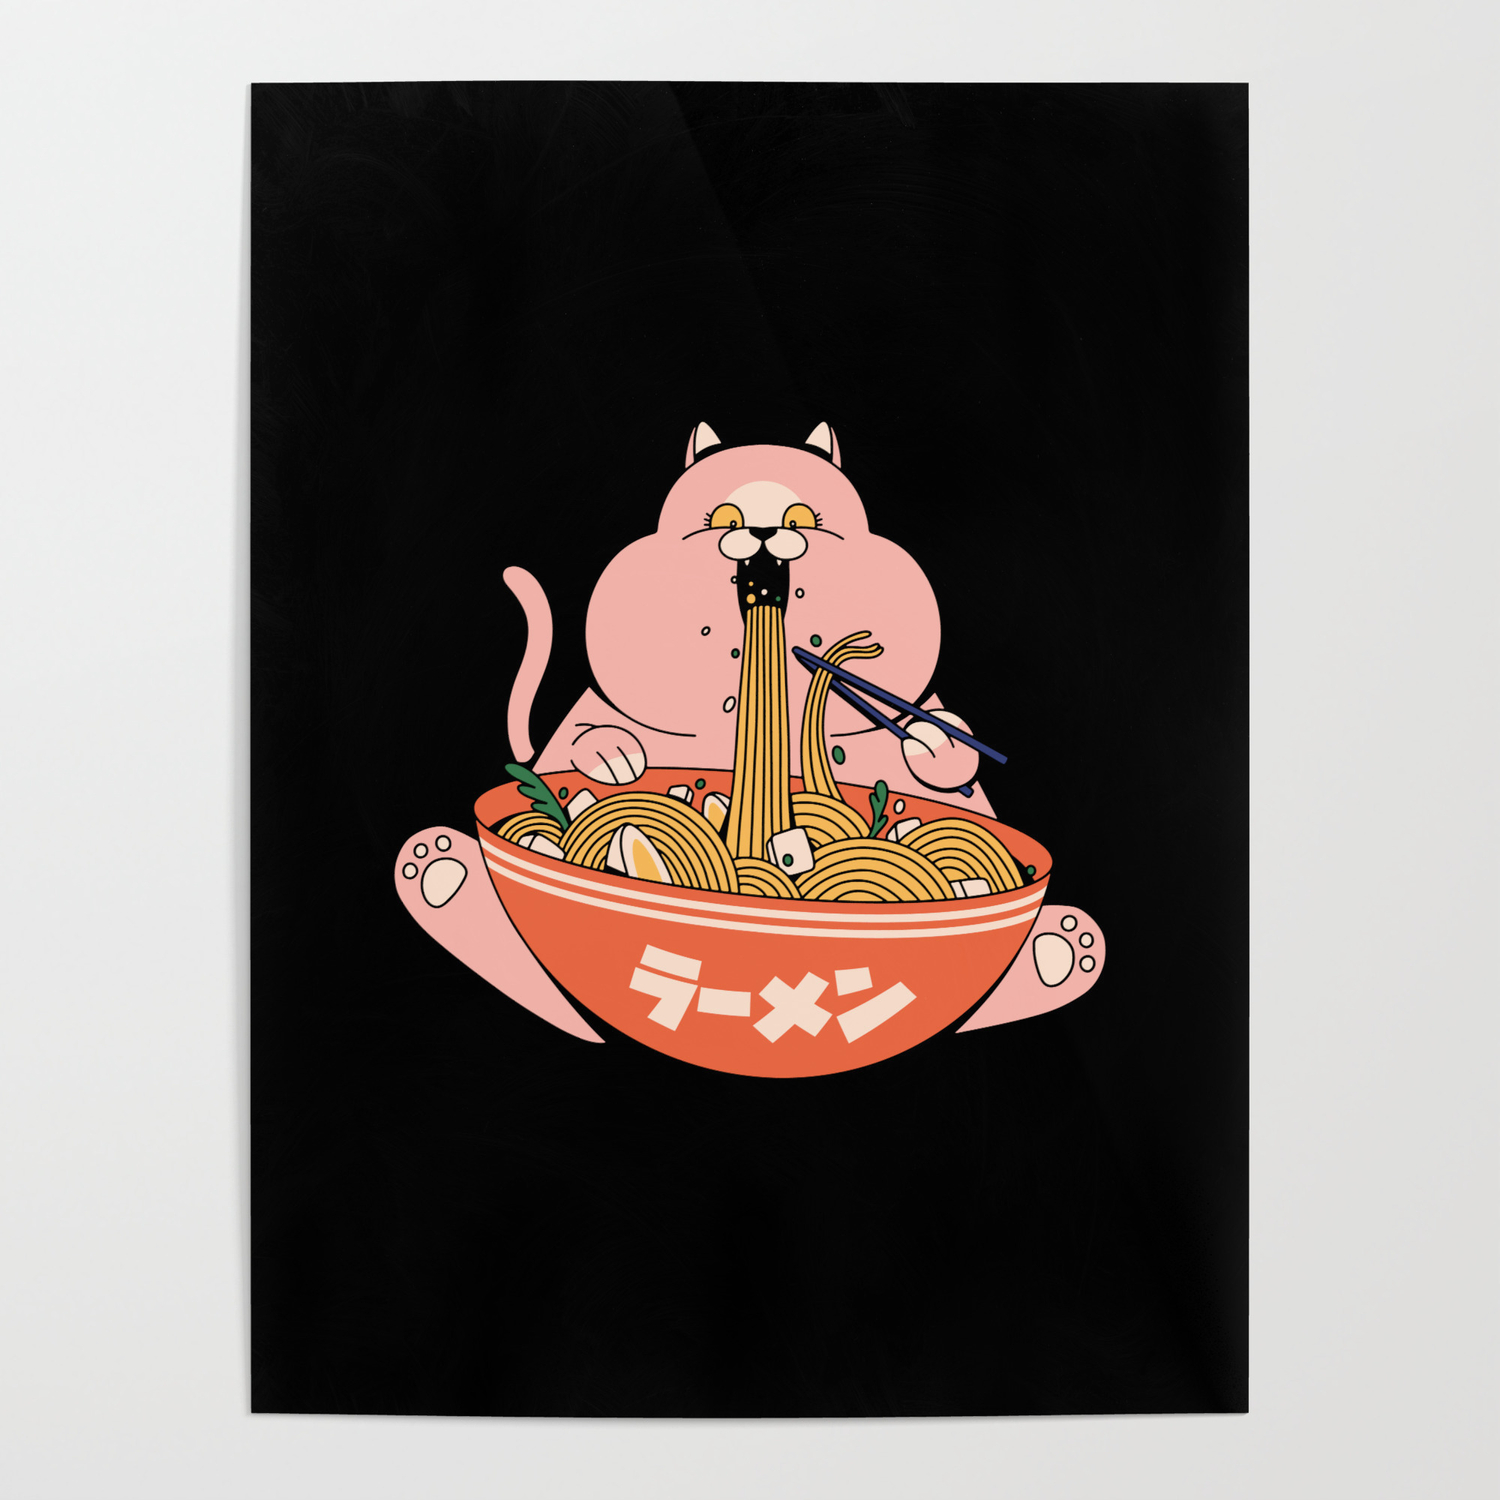 Funny fat ramen noodle cat eating from bowl Poster by Fleur et retro  couleurs pastels | Society6